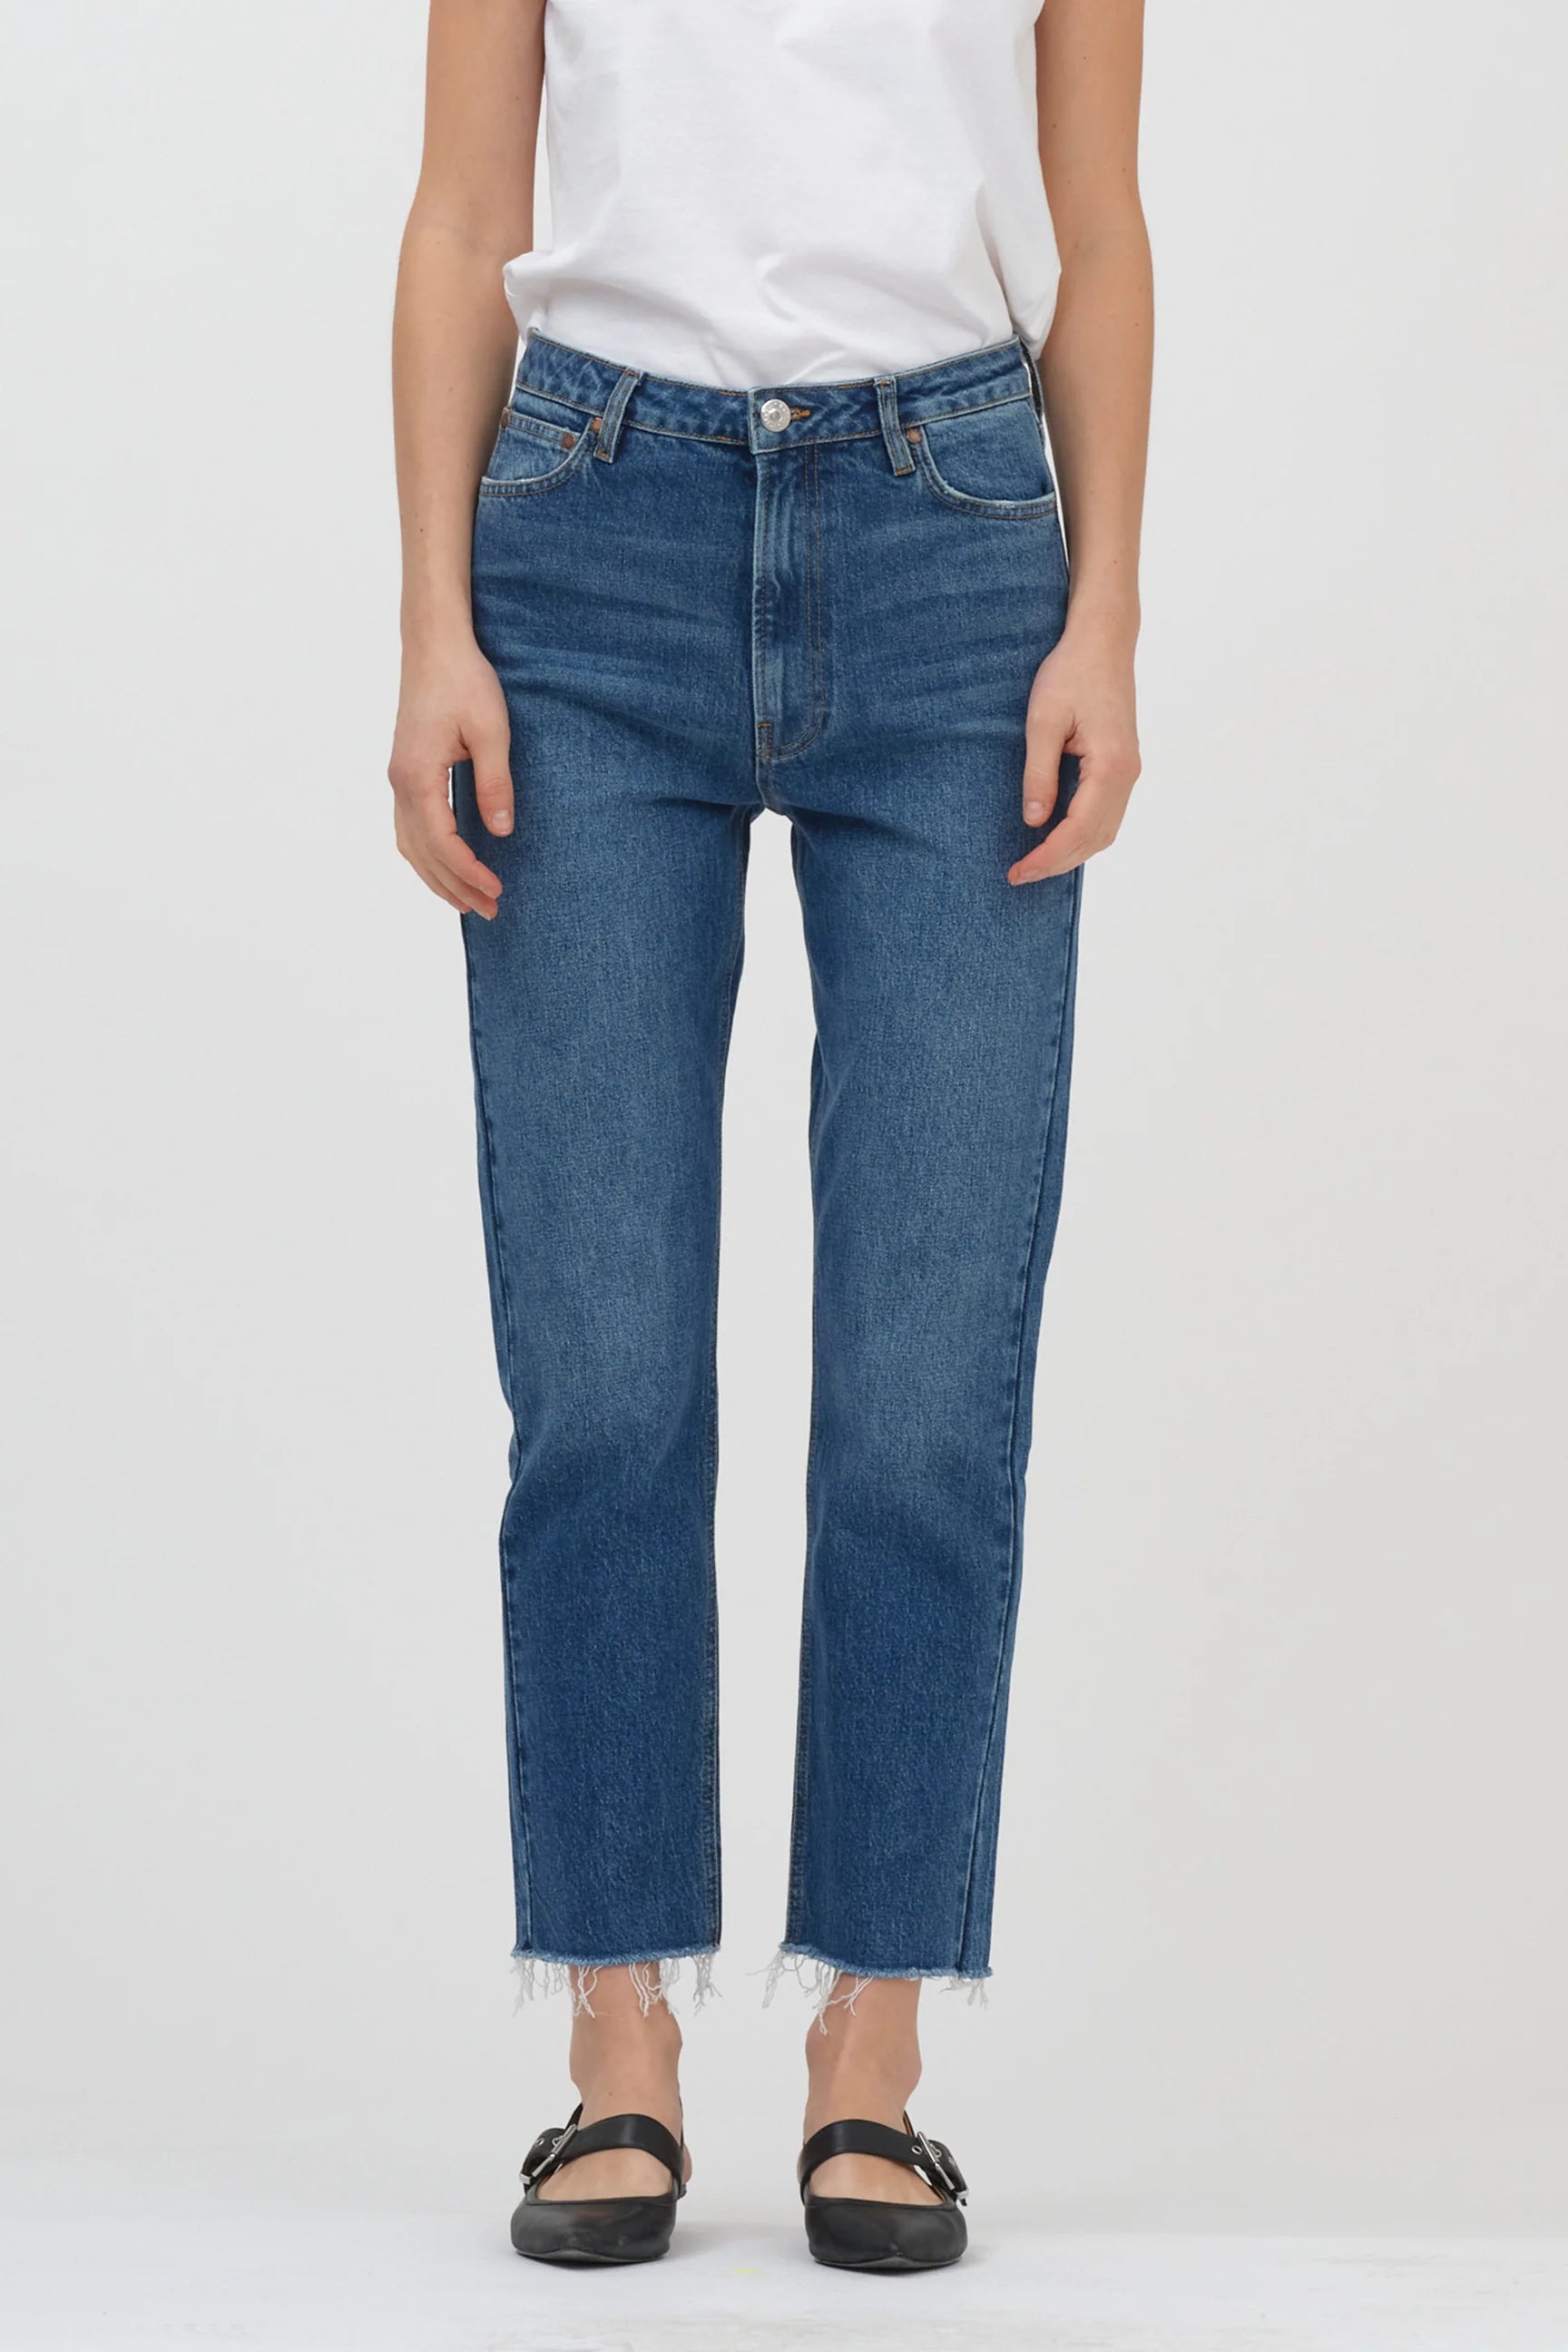 A woman wearing high-waisted Tomorrow Denim Anne Slim Jeans - Boston, made of organic cotton, paired with a white t-shirt.